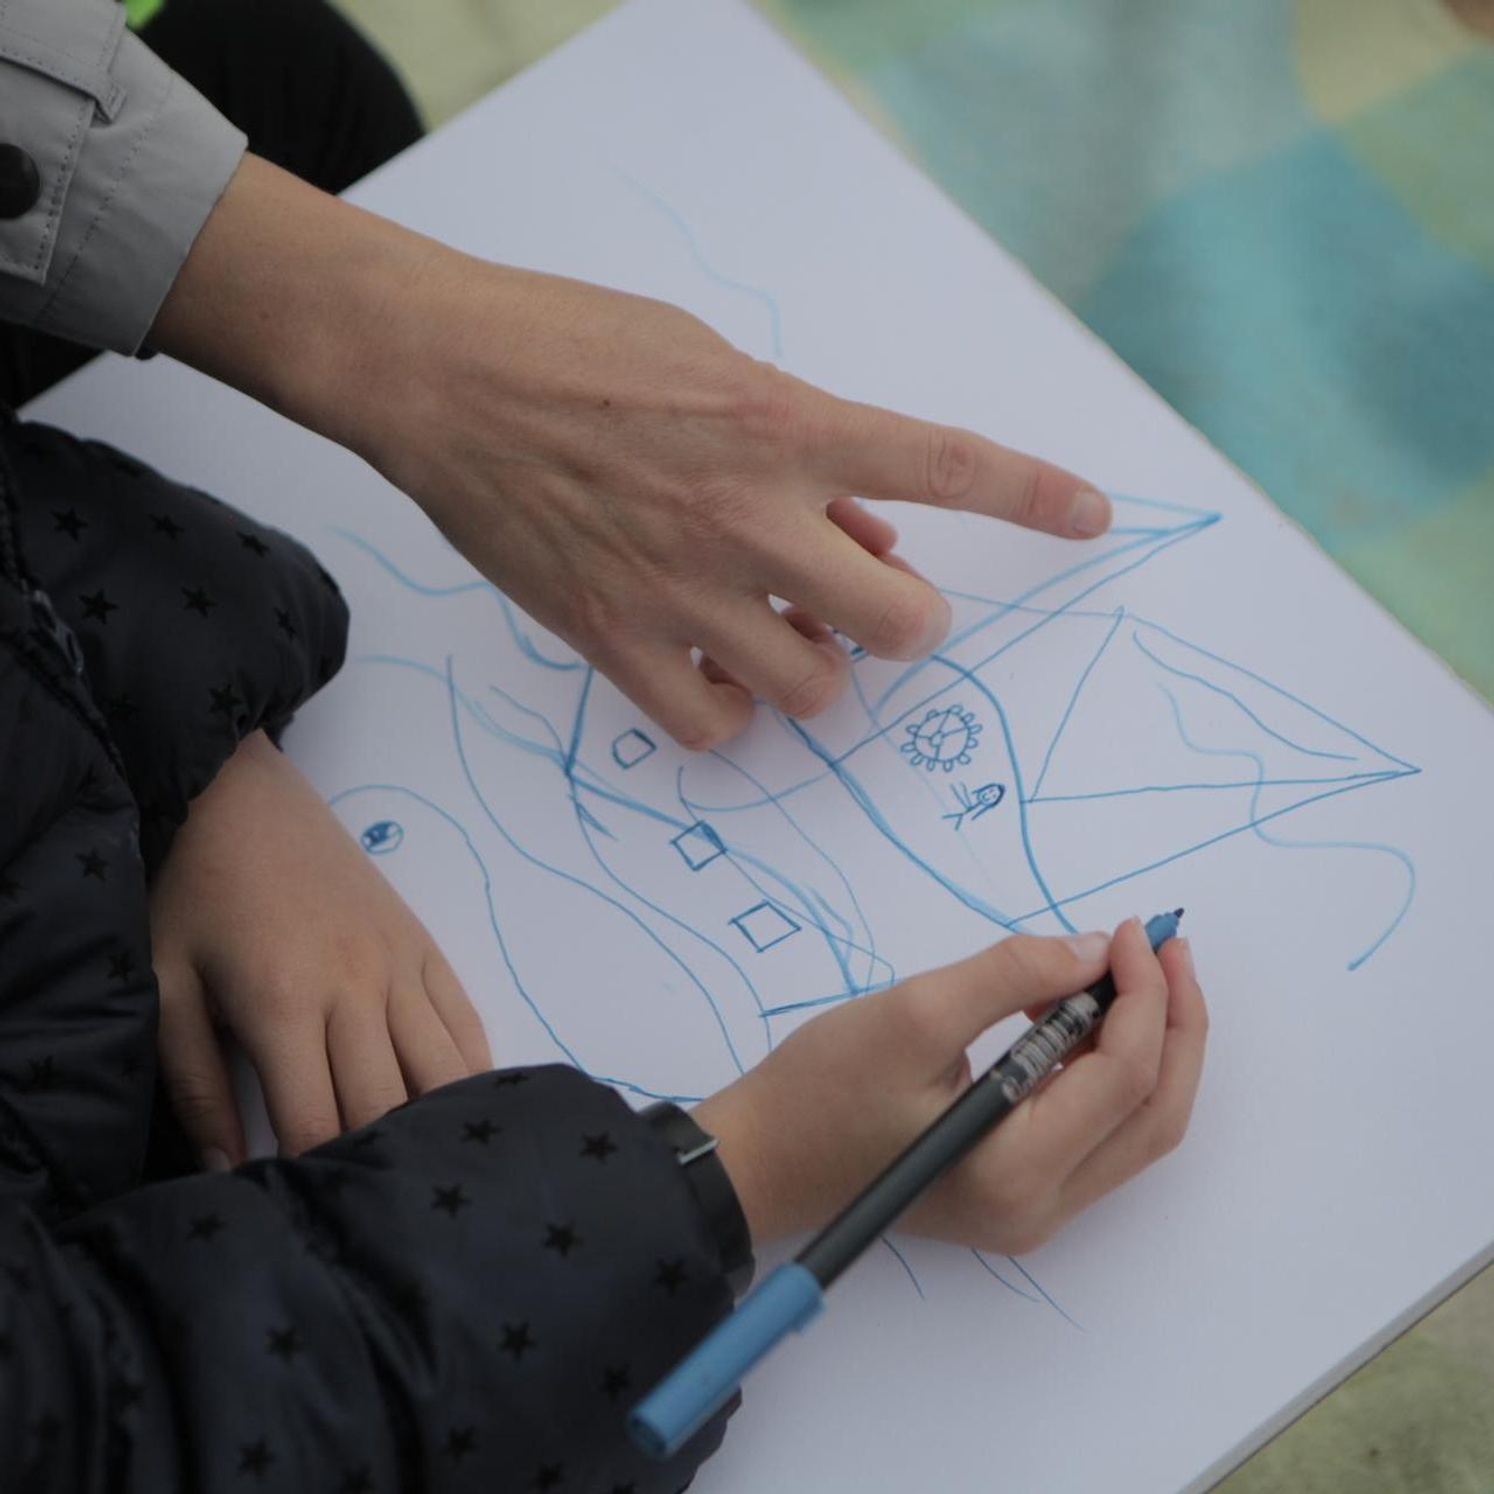 Childs drawing with hands